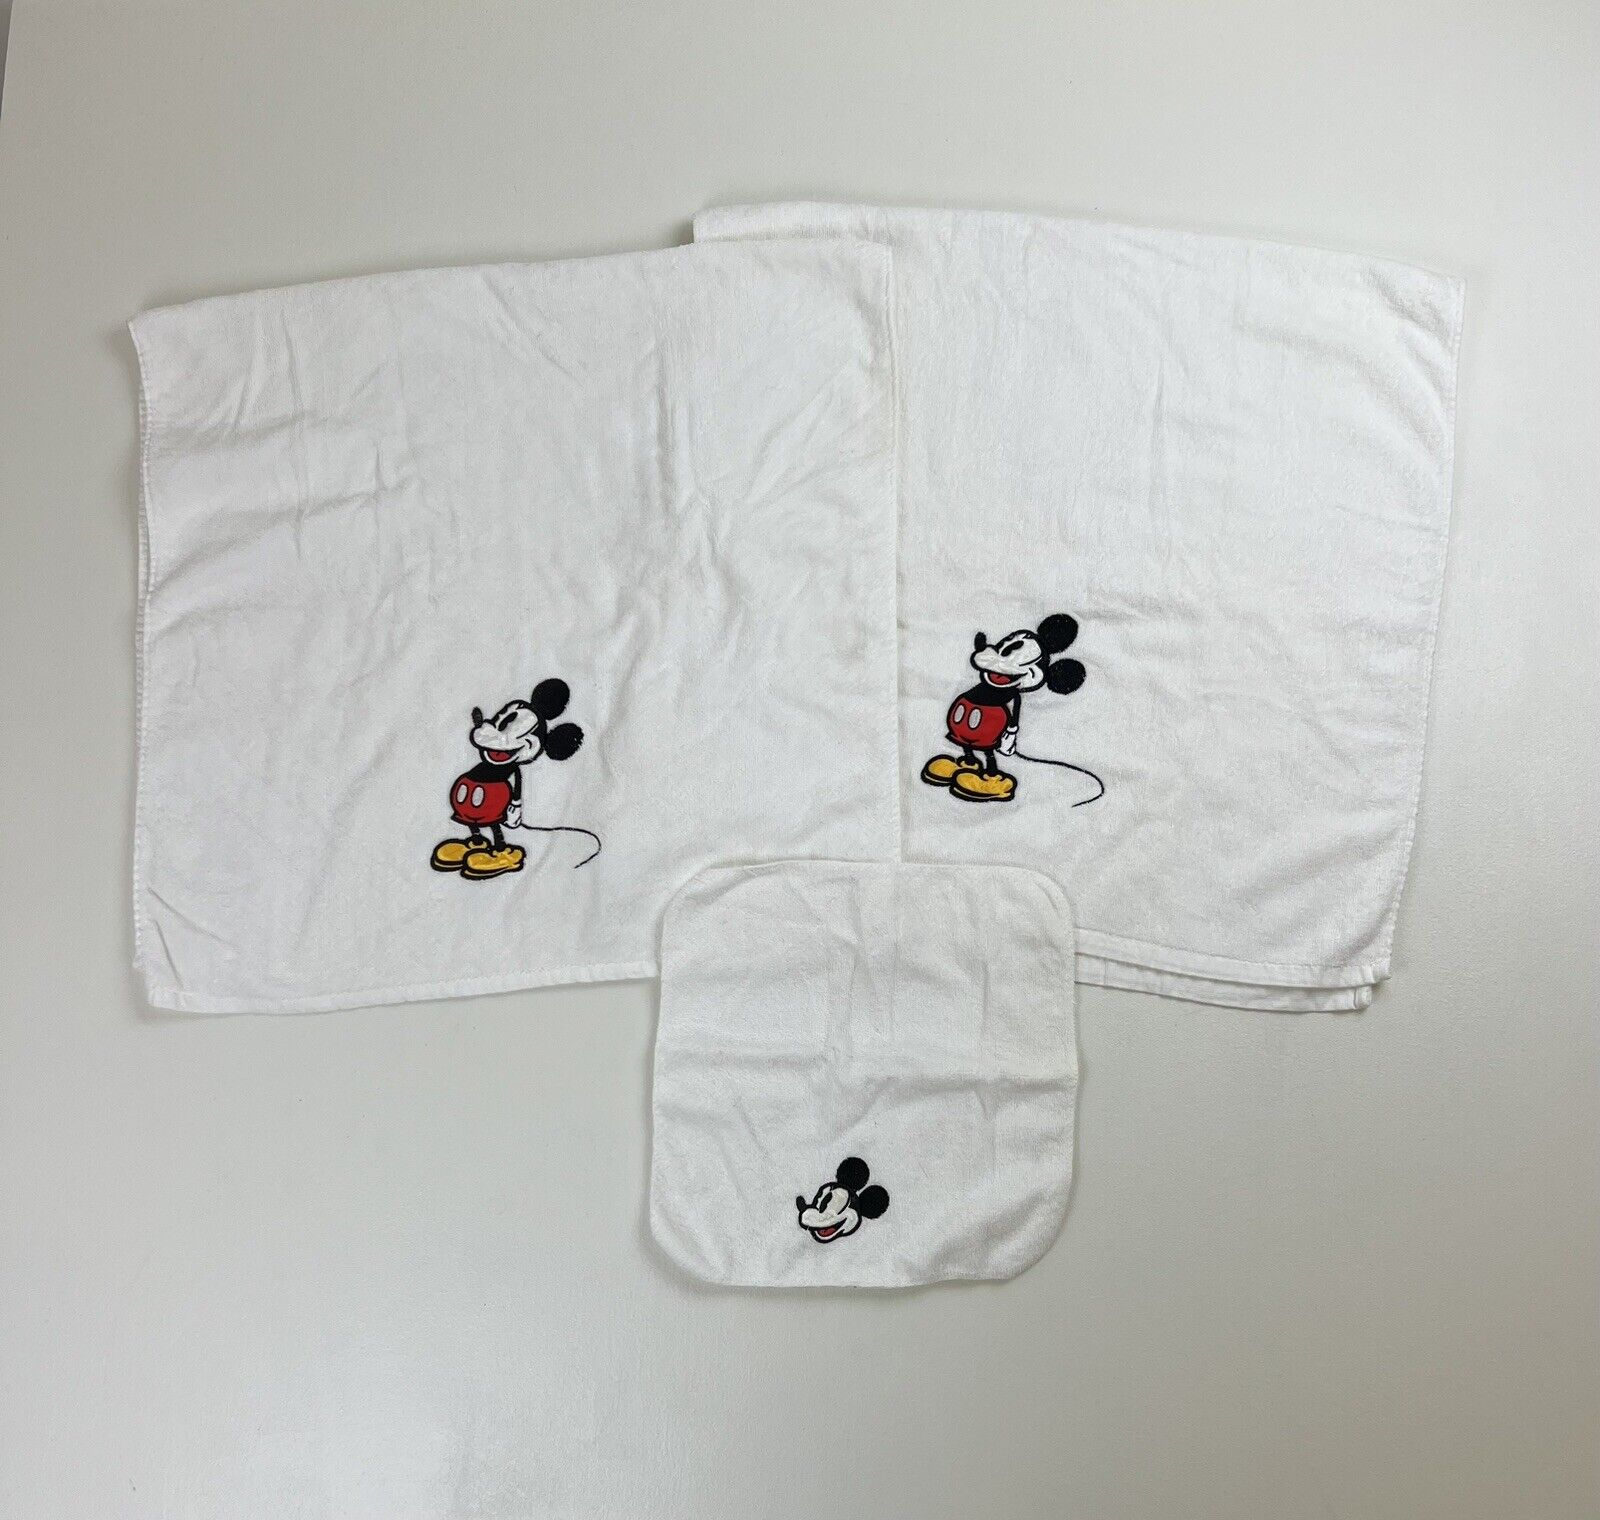 Vtg Disney 2 White Mickey Mouse Bath Towels & 1 Washcloth Embroidered Saturday